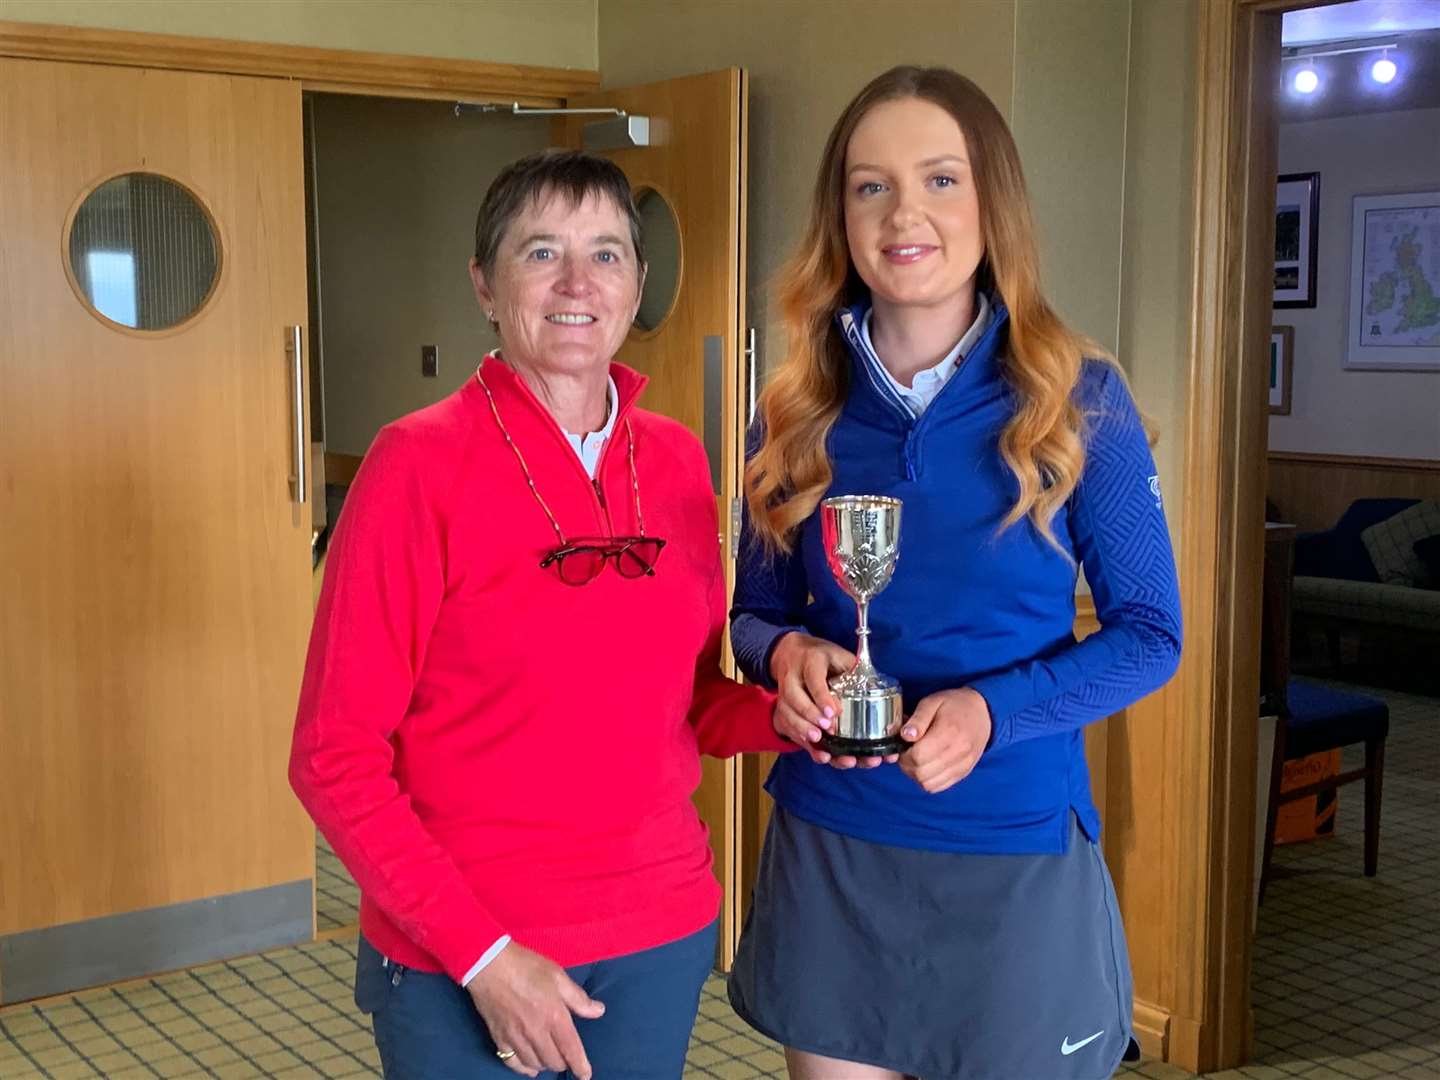 Caitlin Boa celebrated a hat-trick of championships at Royal Dornoch and was presented with the 2022 silverware by ladies captain Alison Bartlett.